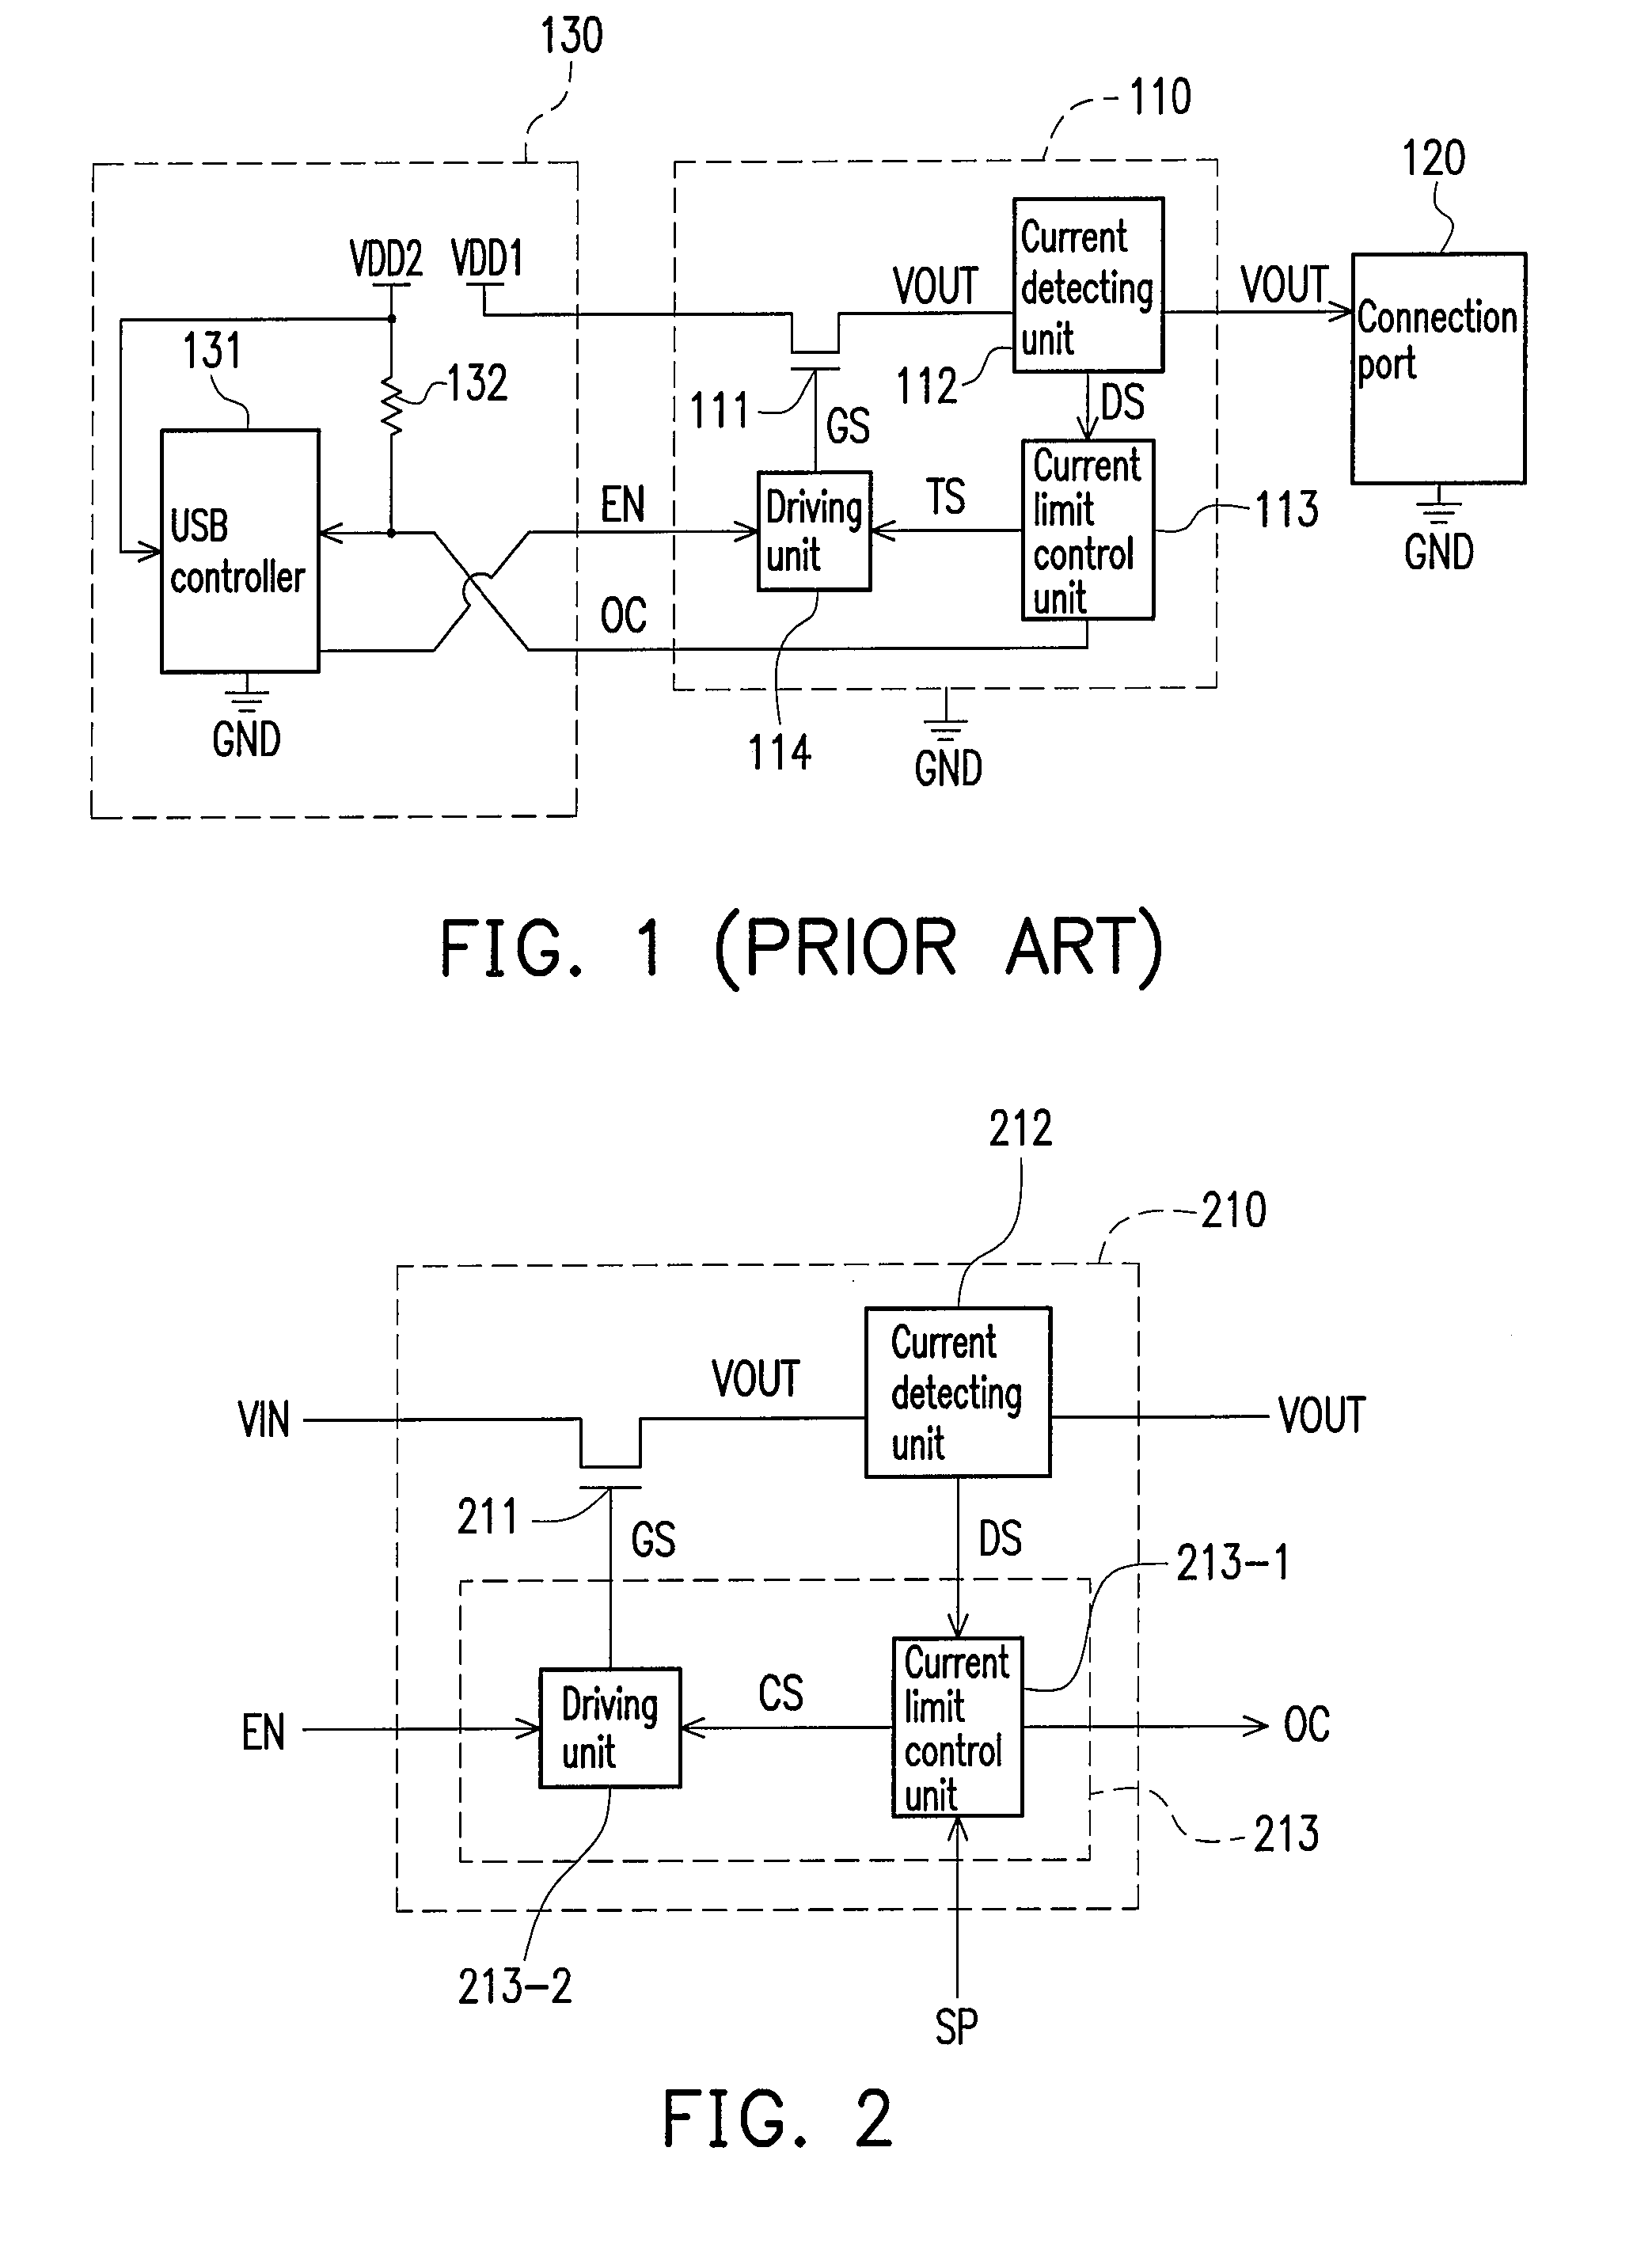 Current limit protection apparatus and method for current limit protection